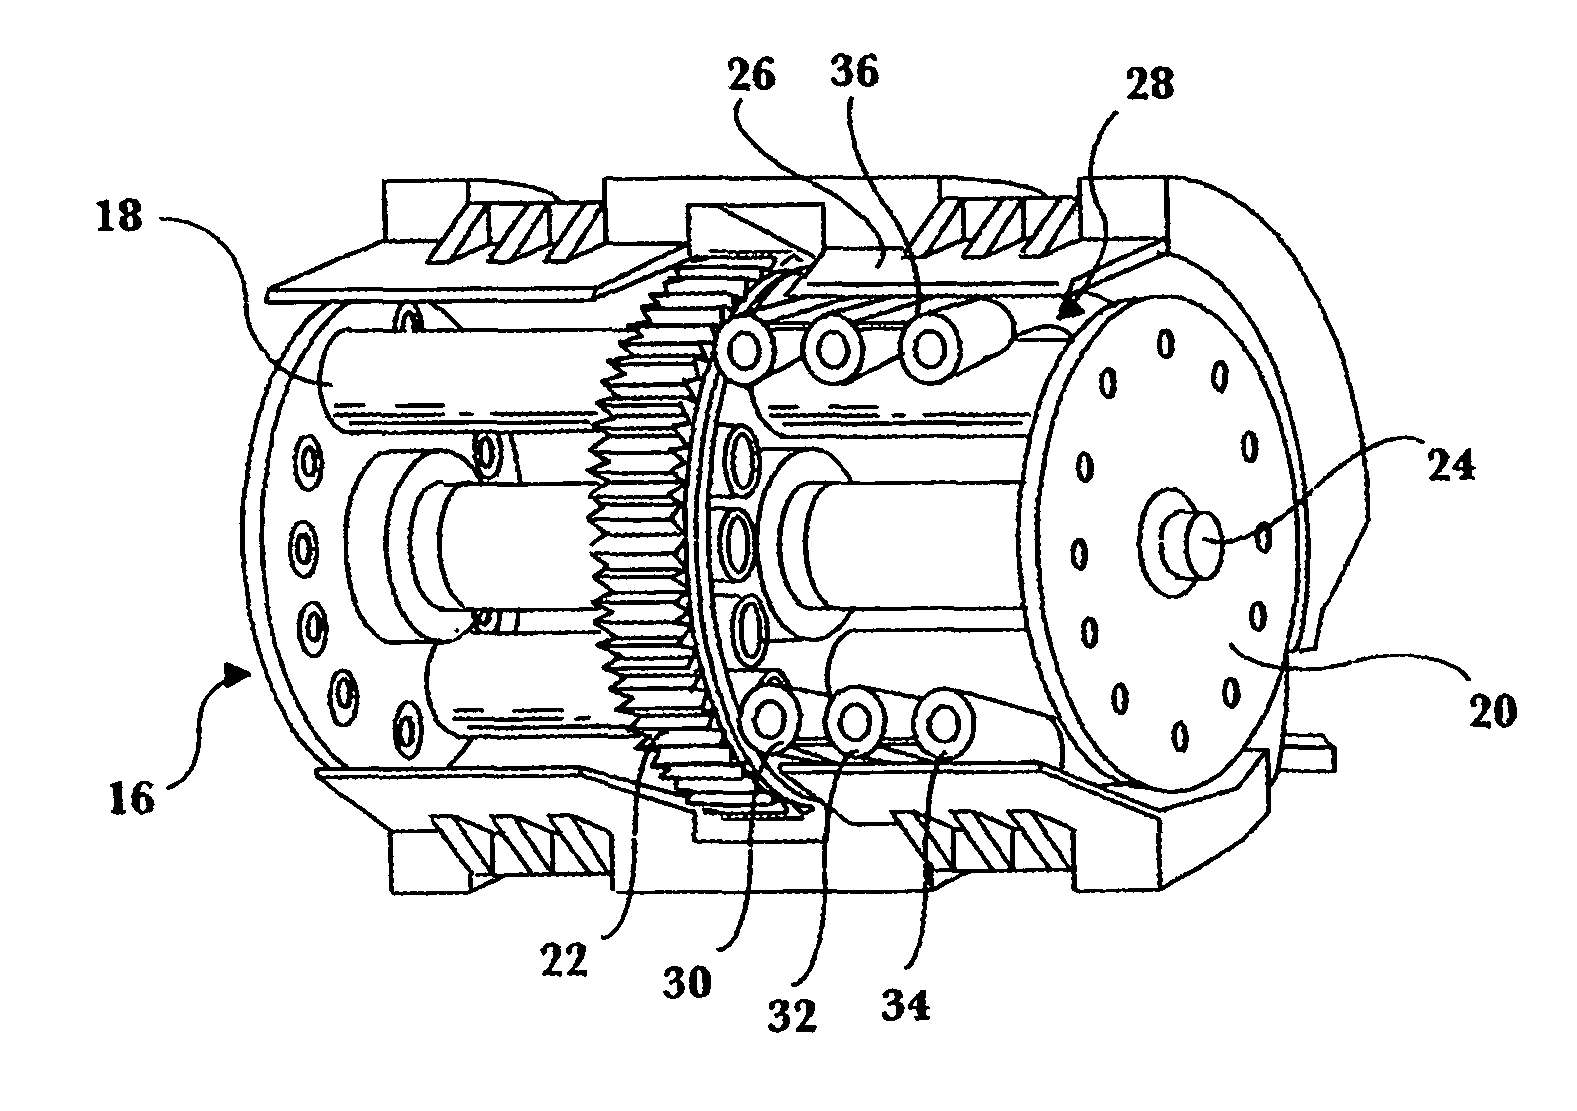 Peristaltic pump with roller pinch valve control